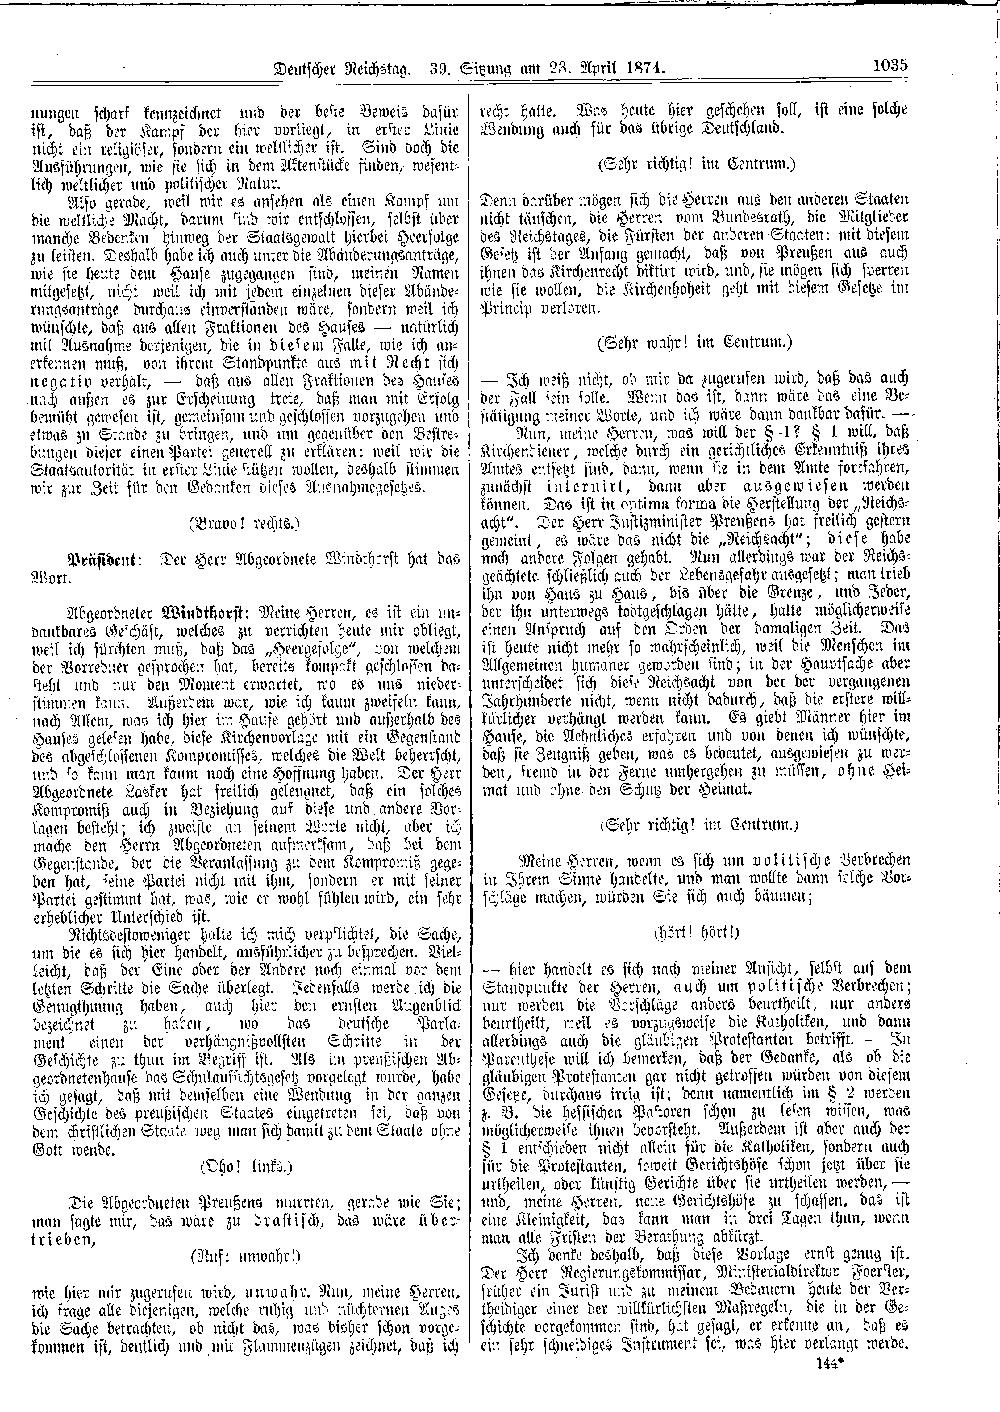 Scan of page 1035